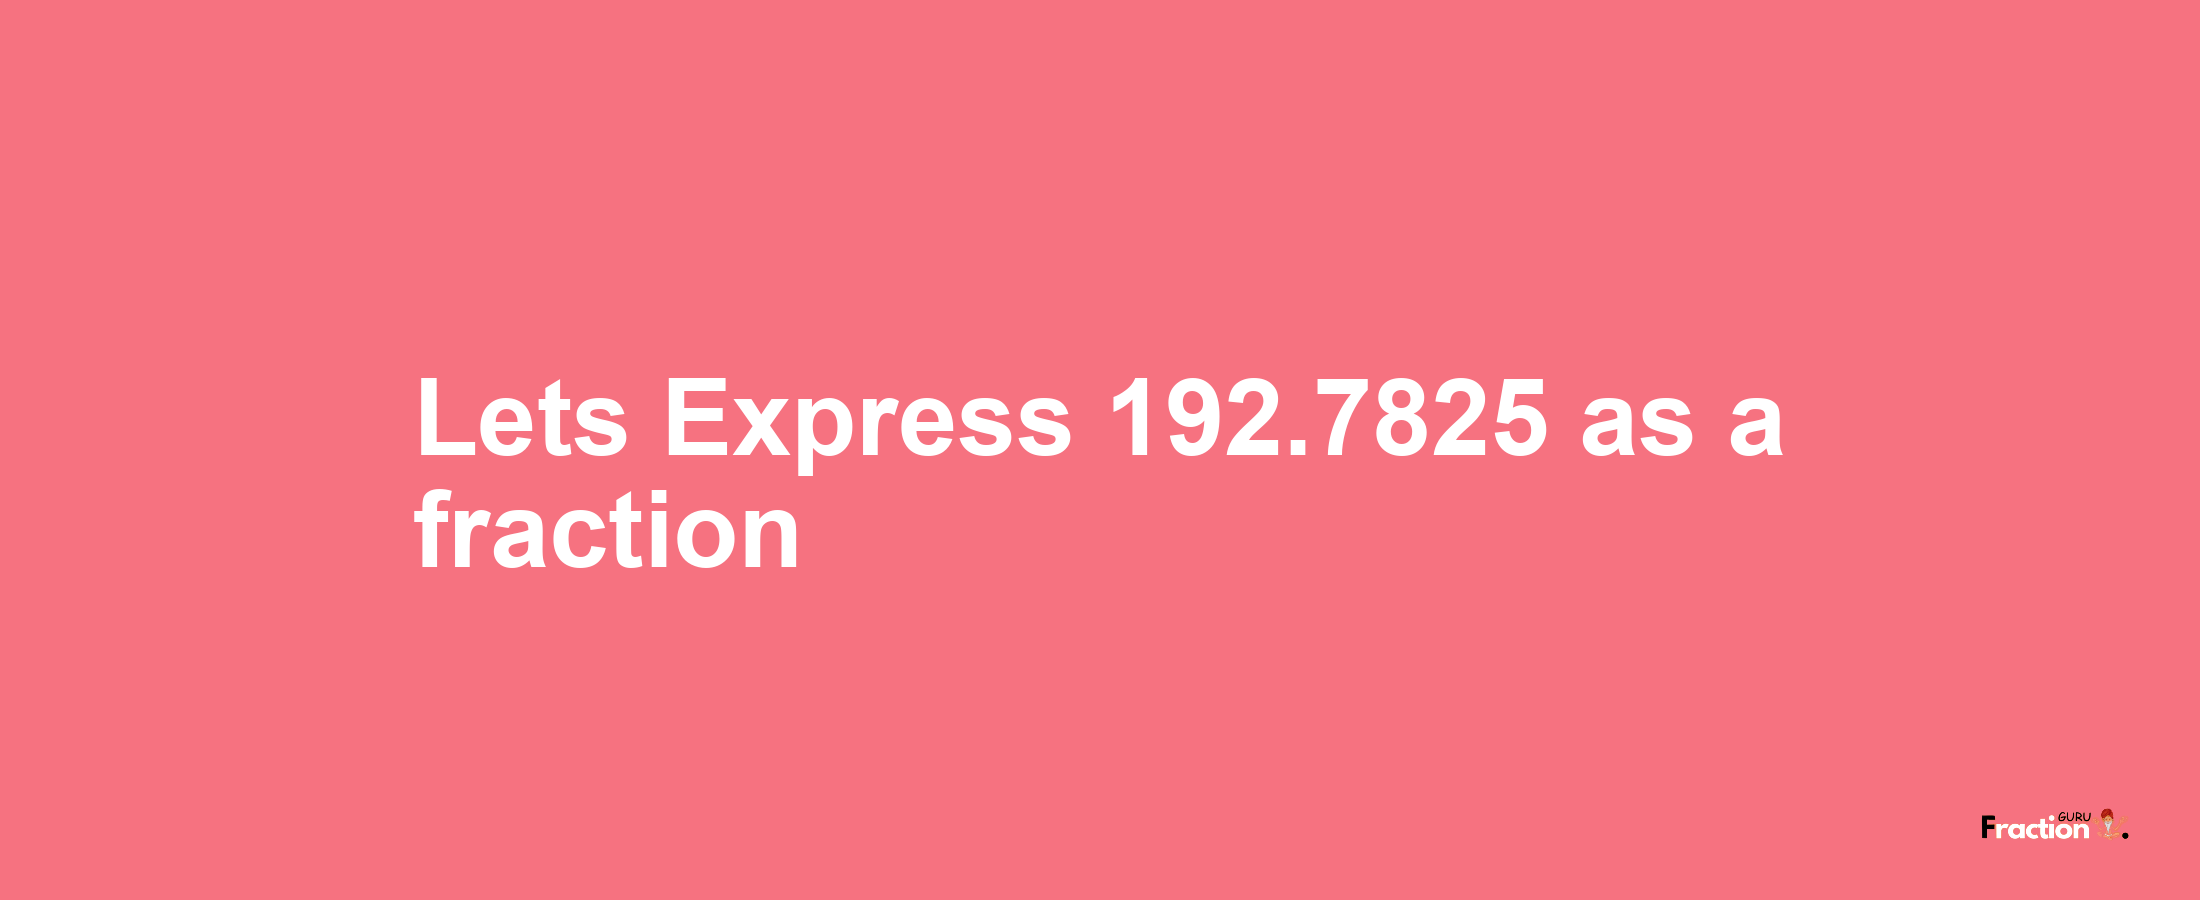 Lets Express 192.7825 as afraction